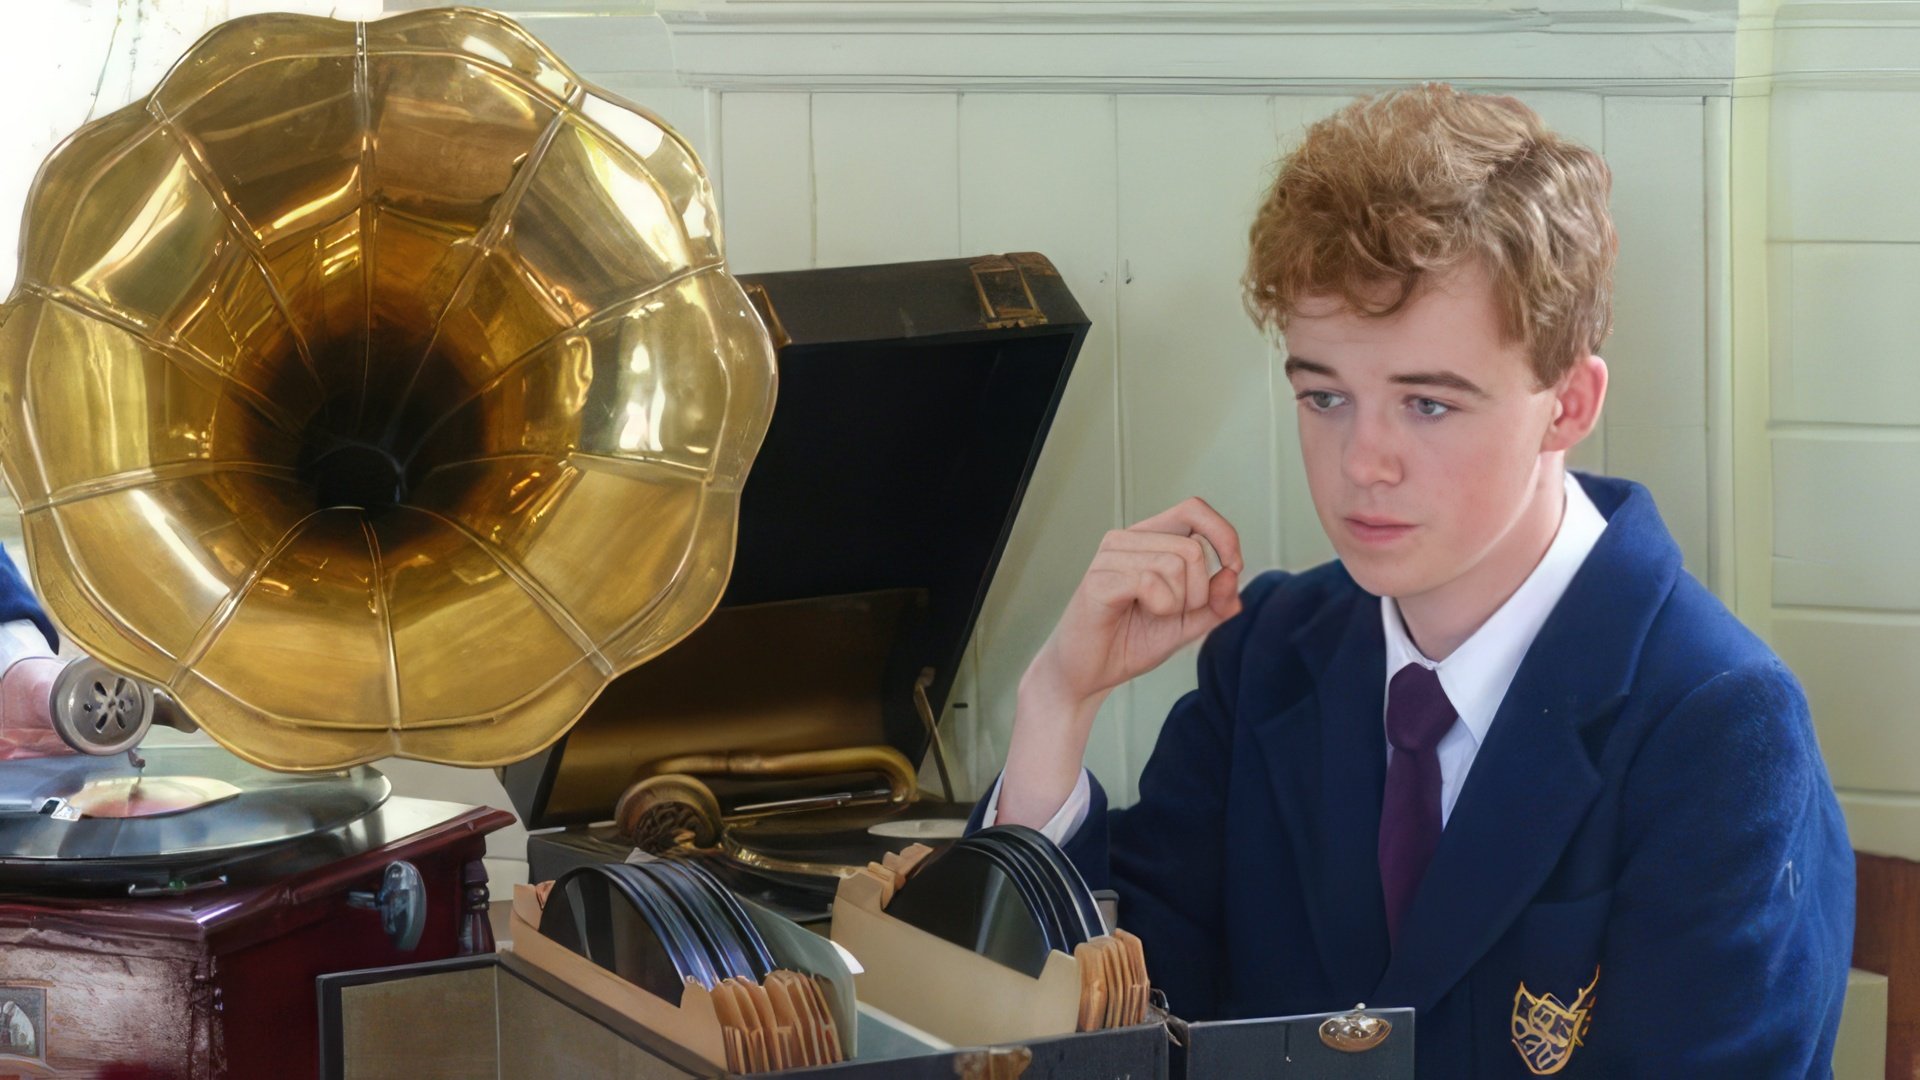 Alex Lawther in the film 'Benjamin Britten: Peace and Conflict'